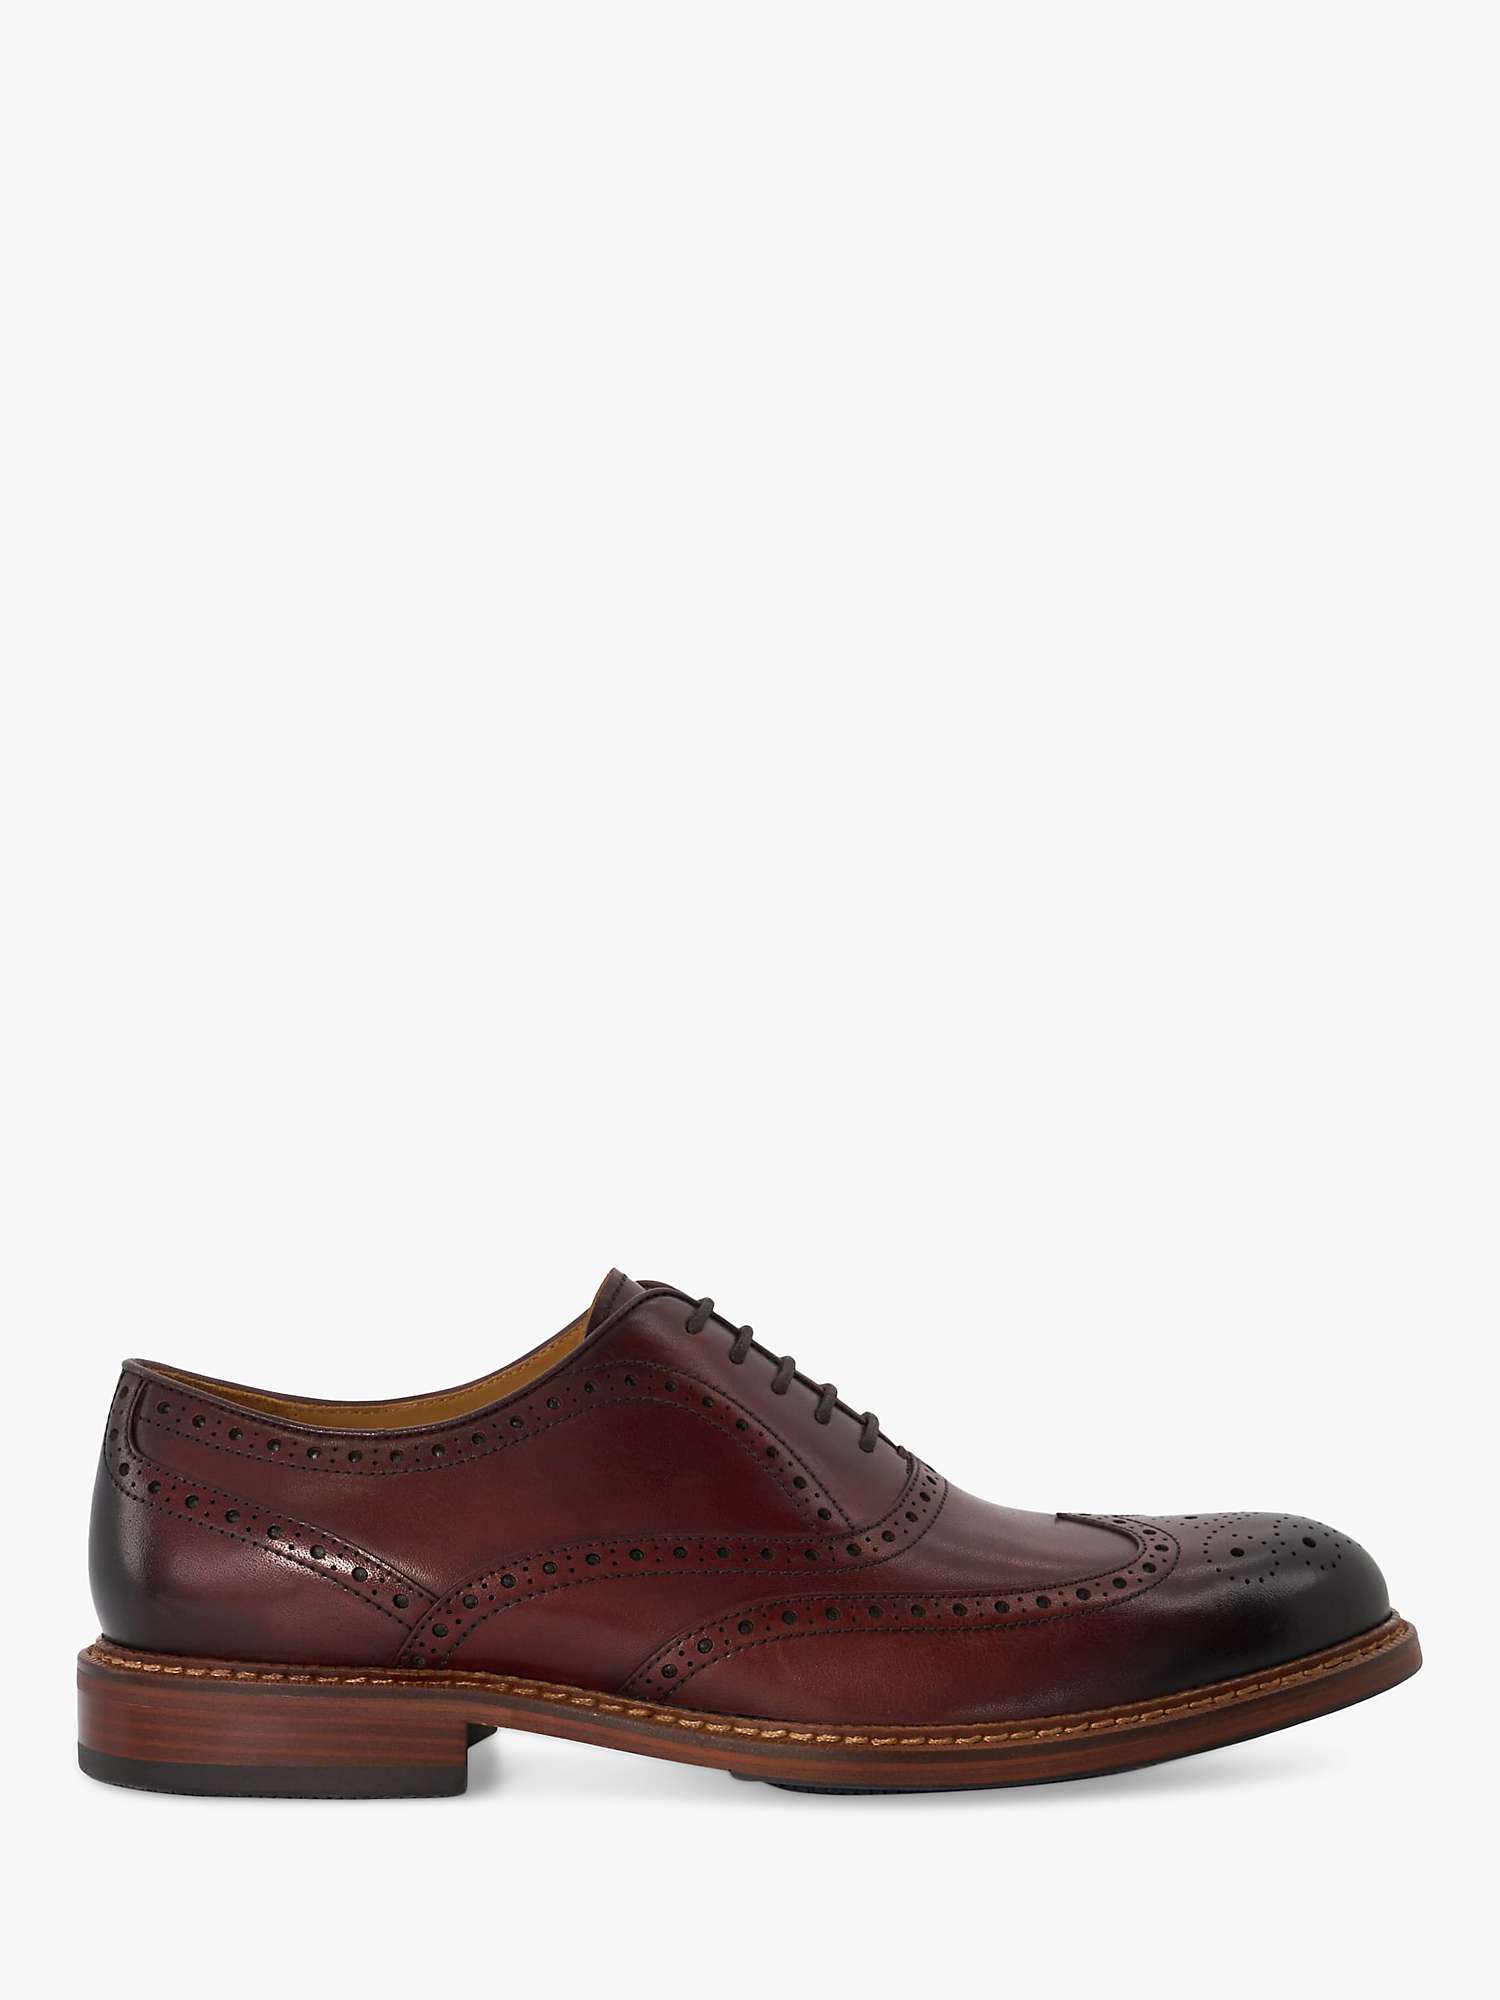 Buy Dune Solihull Brogue Leather Oxford Shoes Online at johnlewis.com